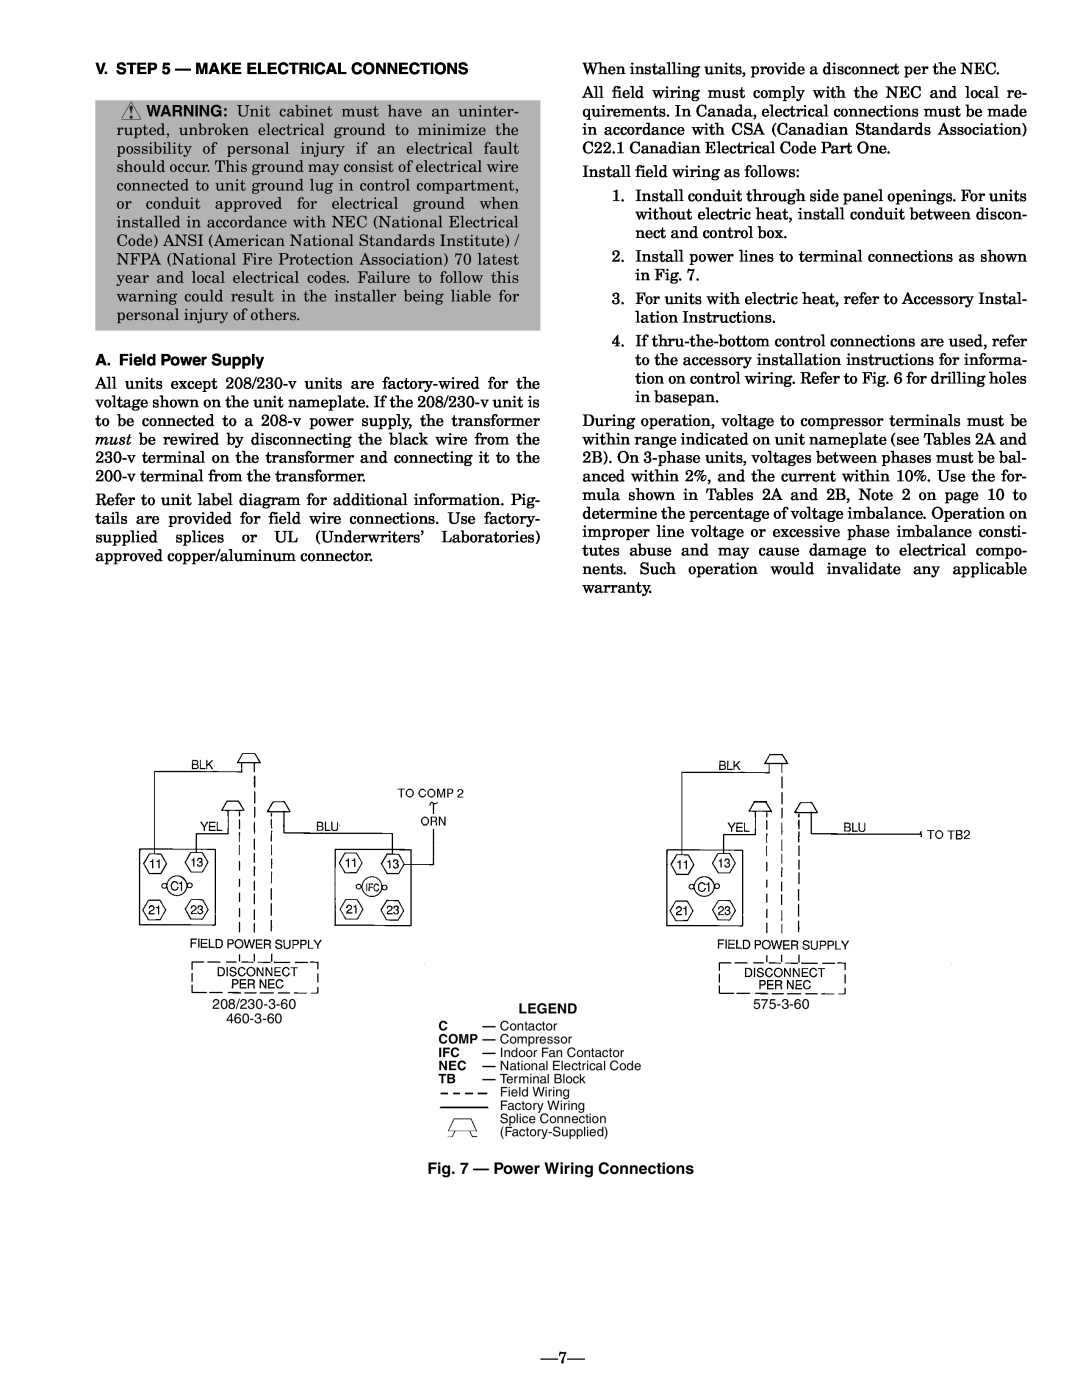 Bryant 548D installation instructions V. - Make Electrical Connections, A. Field Power Supply, Power Wiring Connections 